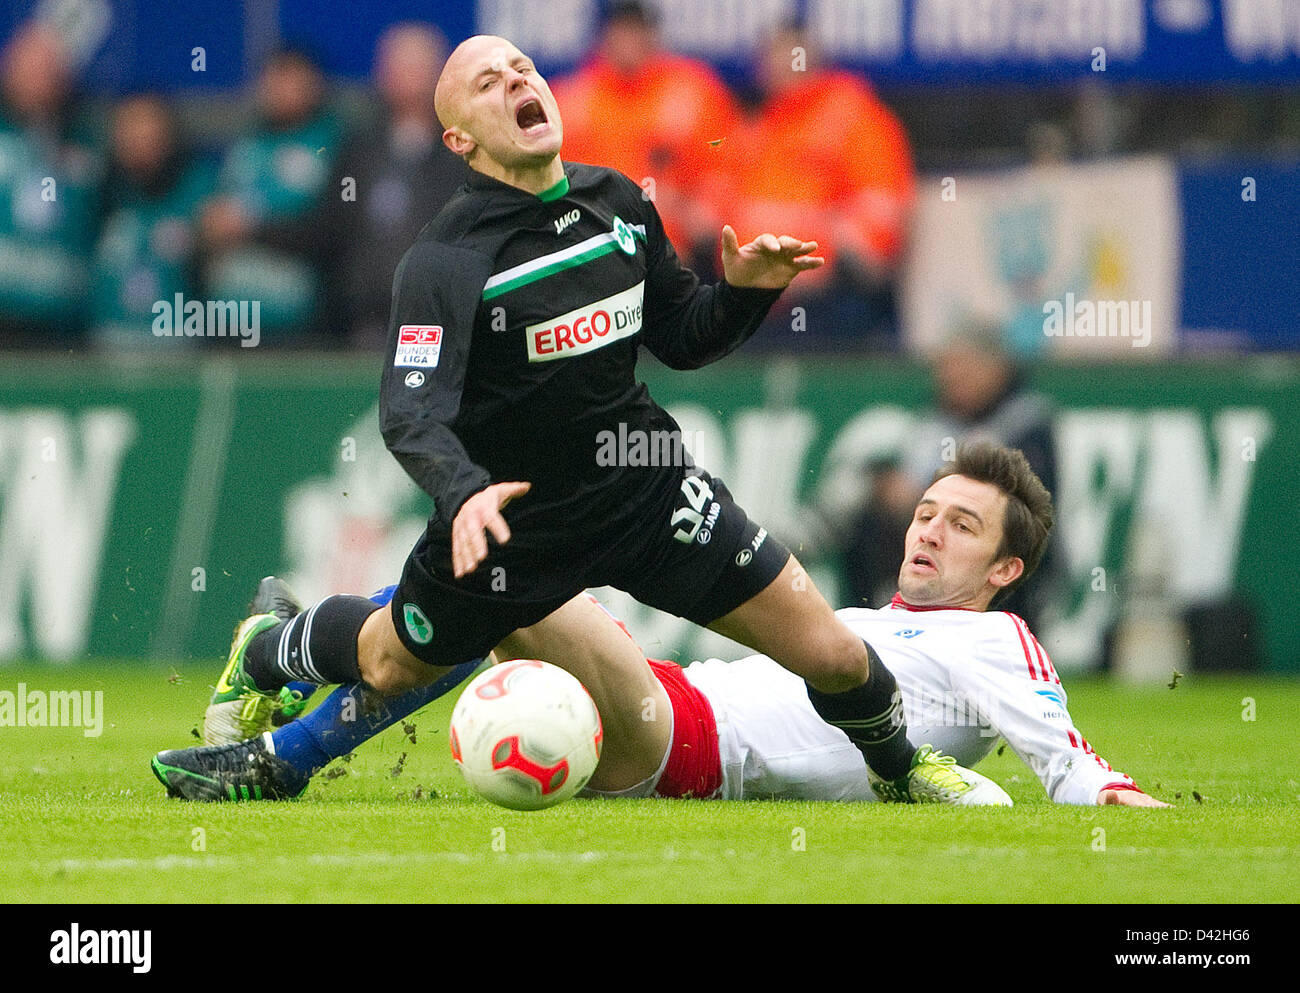 Fuerth's Jozsef Varga (F) and Hamburg's Milan Badelj vie for the ball during the match Hamburger SV - SpVgg Greuther Fuerth in the Imtech Arena in Hamburg, Germany, 02 March 2013. PHOTO: AXEL HEIMKEN   (ATTENTION: EMBARGO CONDITIONS! The DFL permits the further utilisation of up to 15 pictures only (no sequntial pictures or video-similar series of pictures allowed) via the internet and online media during the match (including halftime), taken from inside the stadium and/or prior to the start of the match. The DFL permits the unrestricted transmission of digitised recordings during the match ex Stock Photo